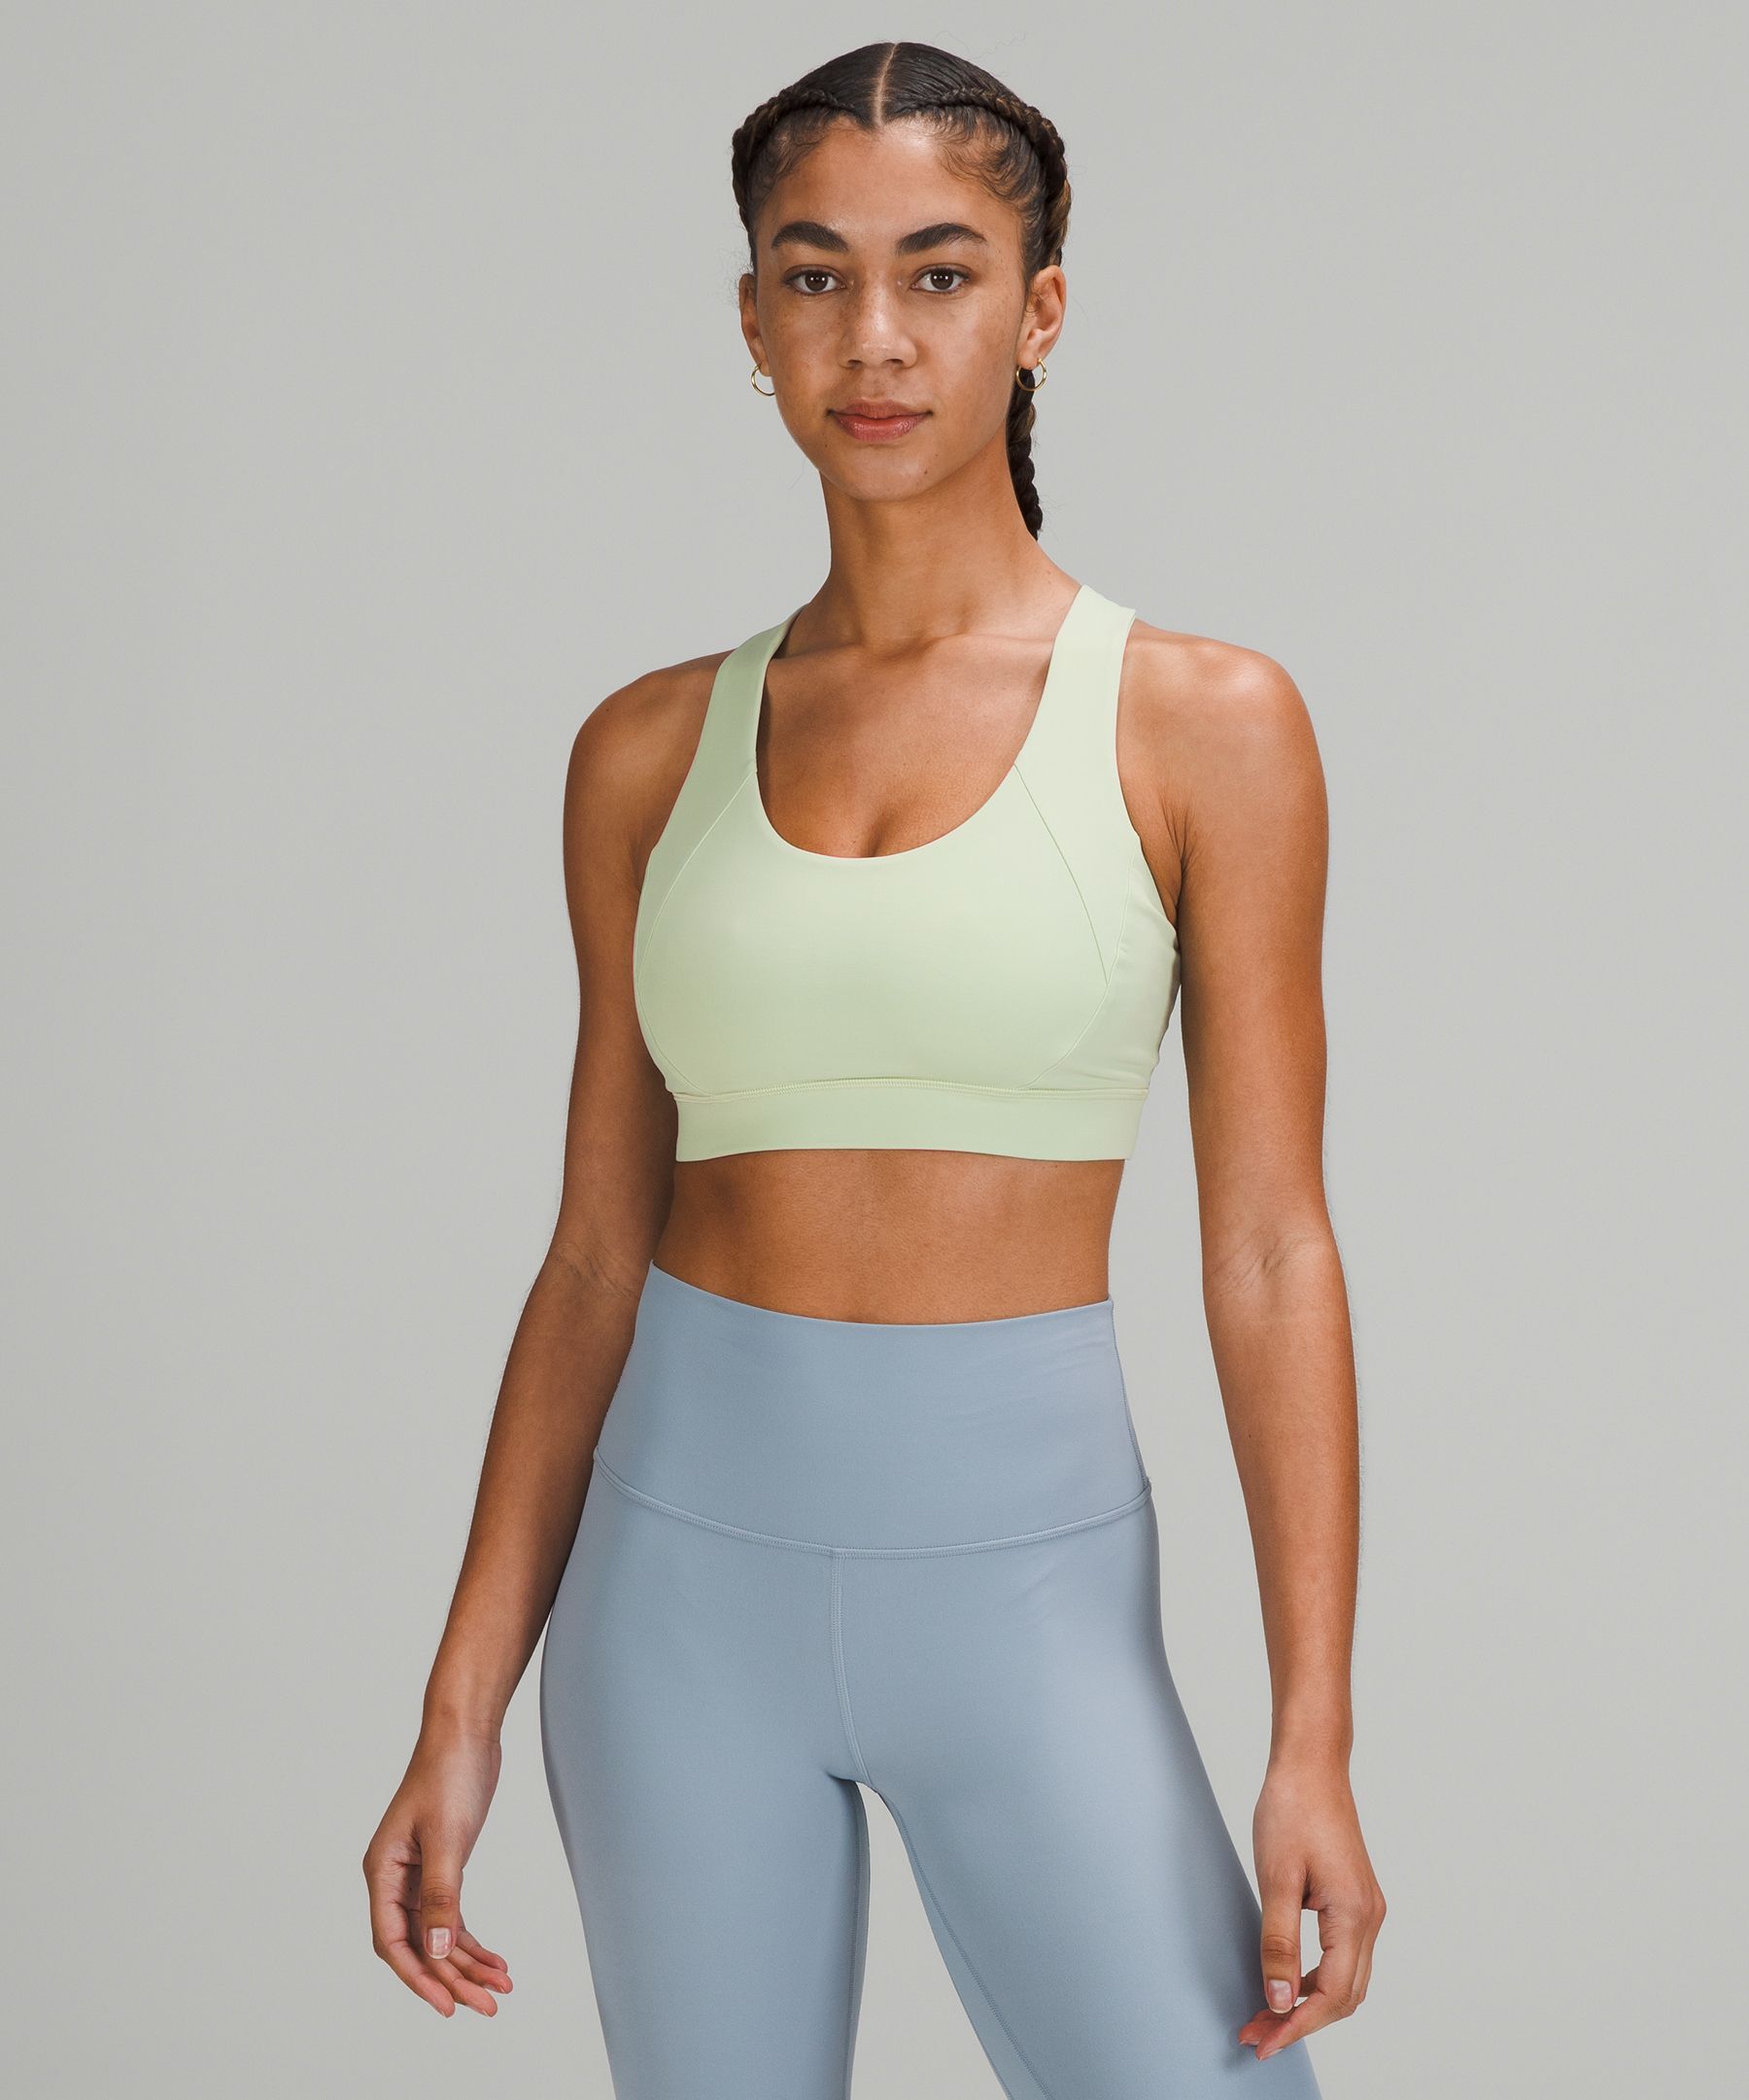 Lululemon Free To Be Elevated Bra Light Support, Dd/ddd(e) Cup In Creamy Mint